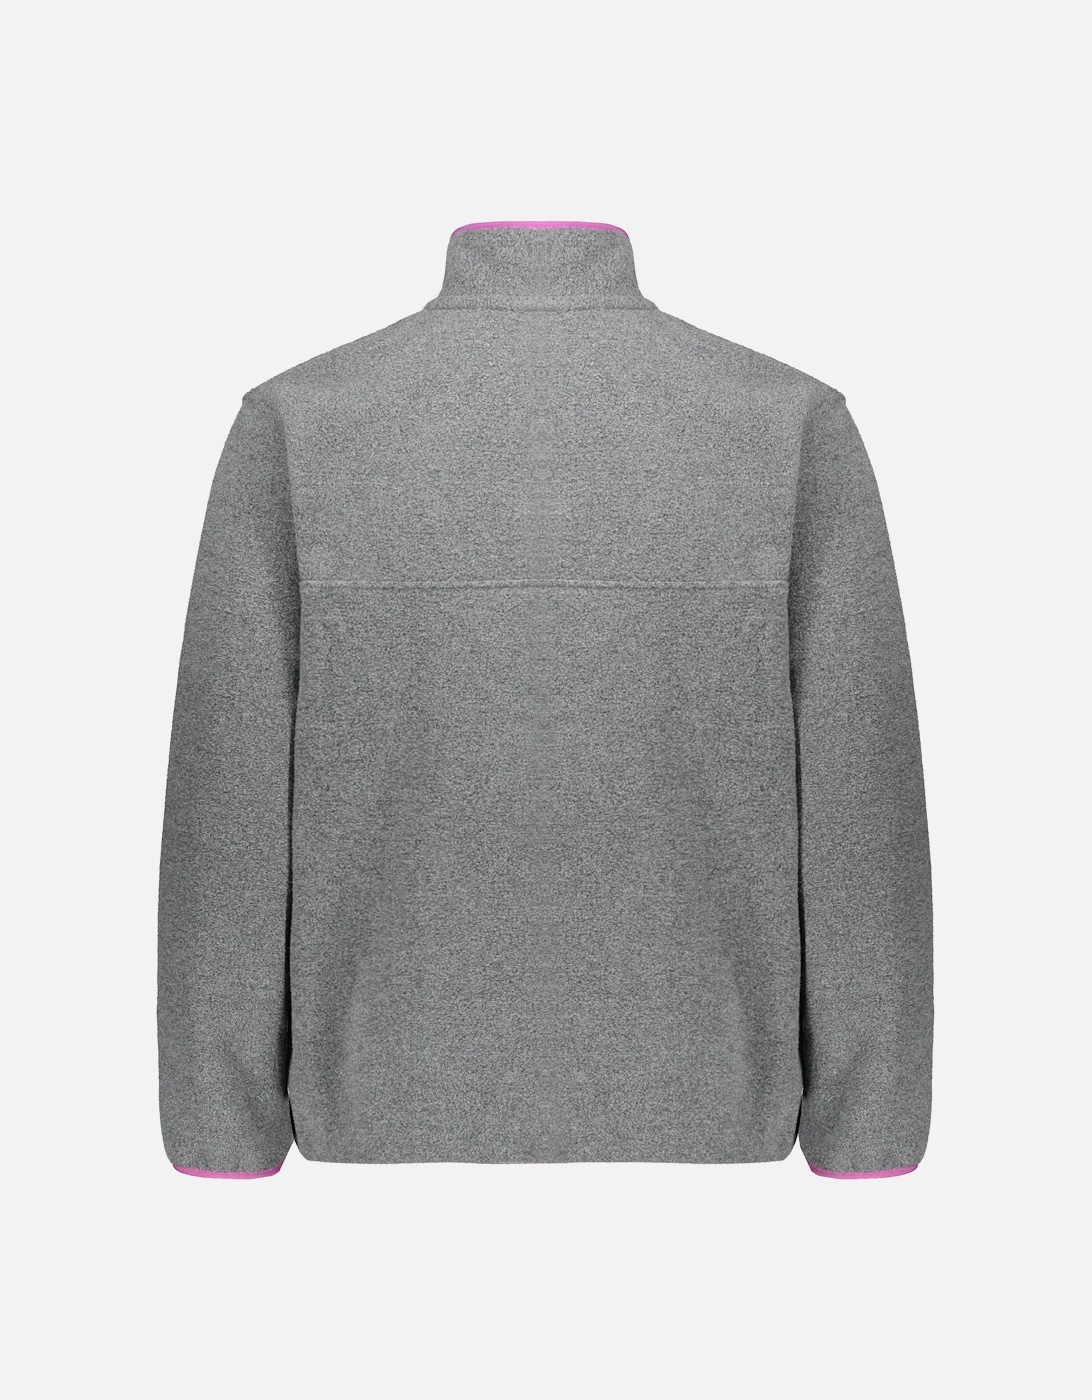 Synch Sweat - Nickel Pink